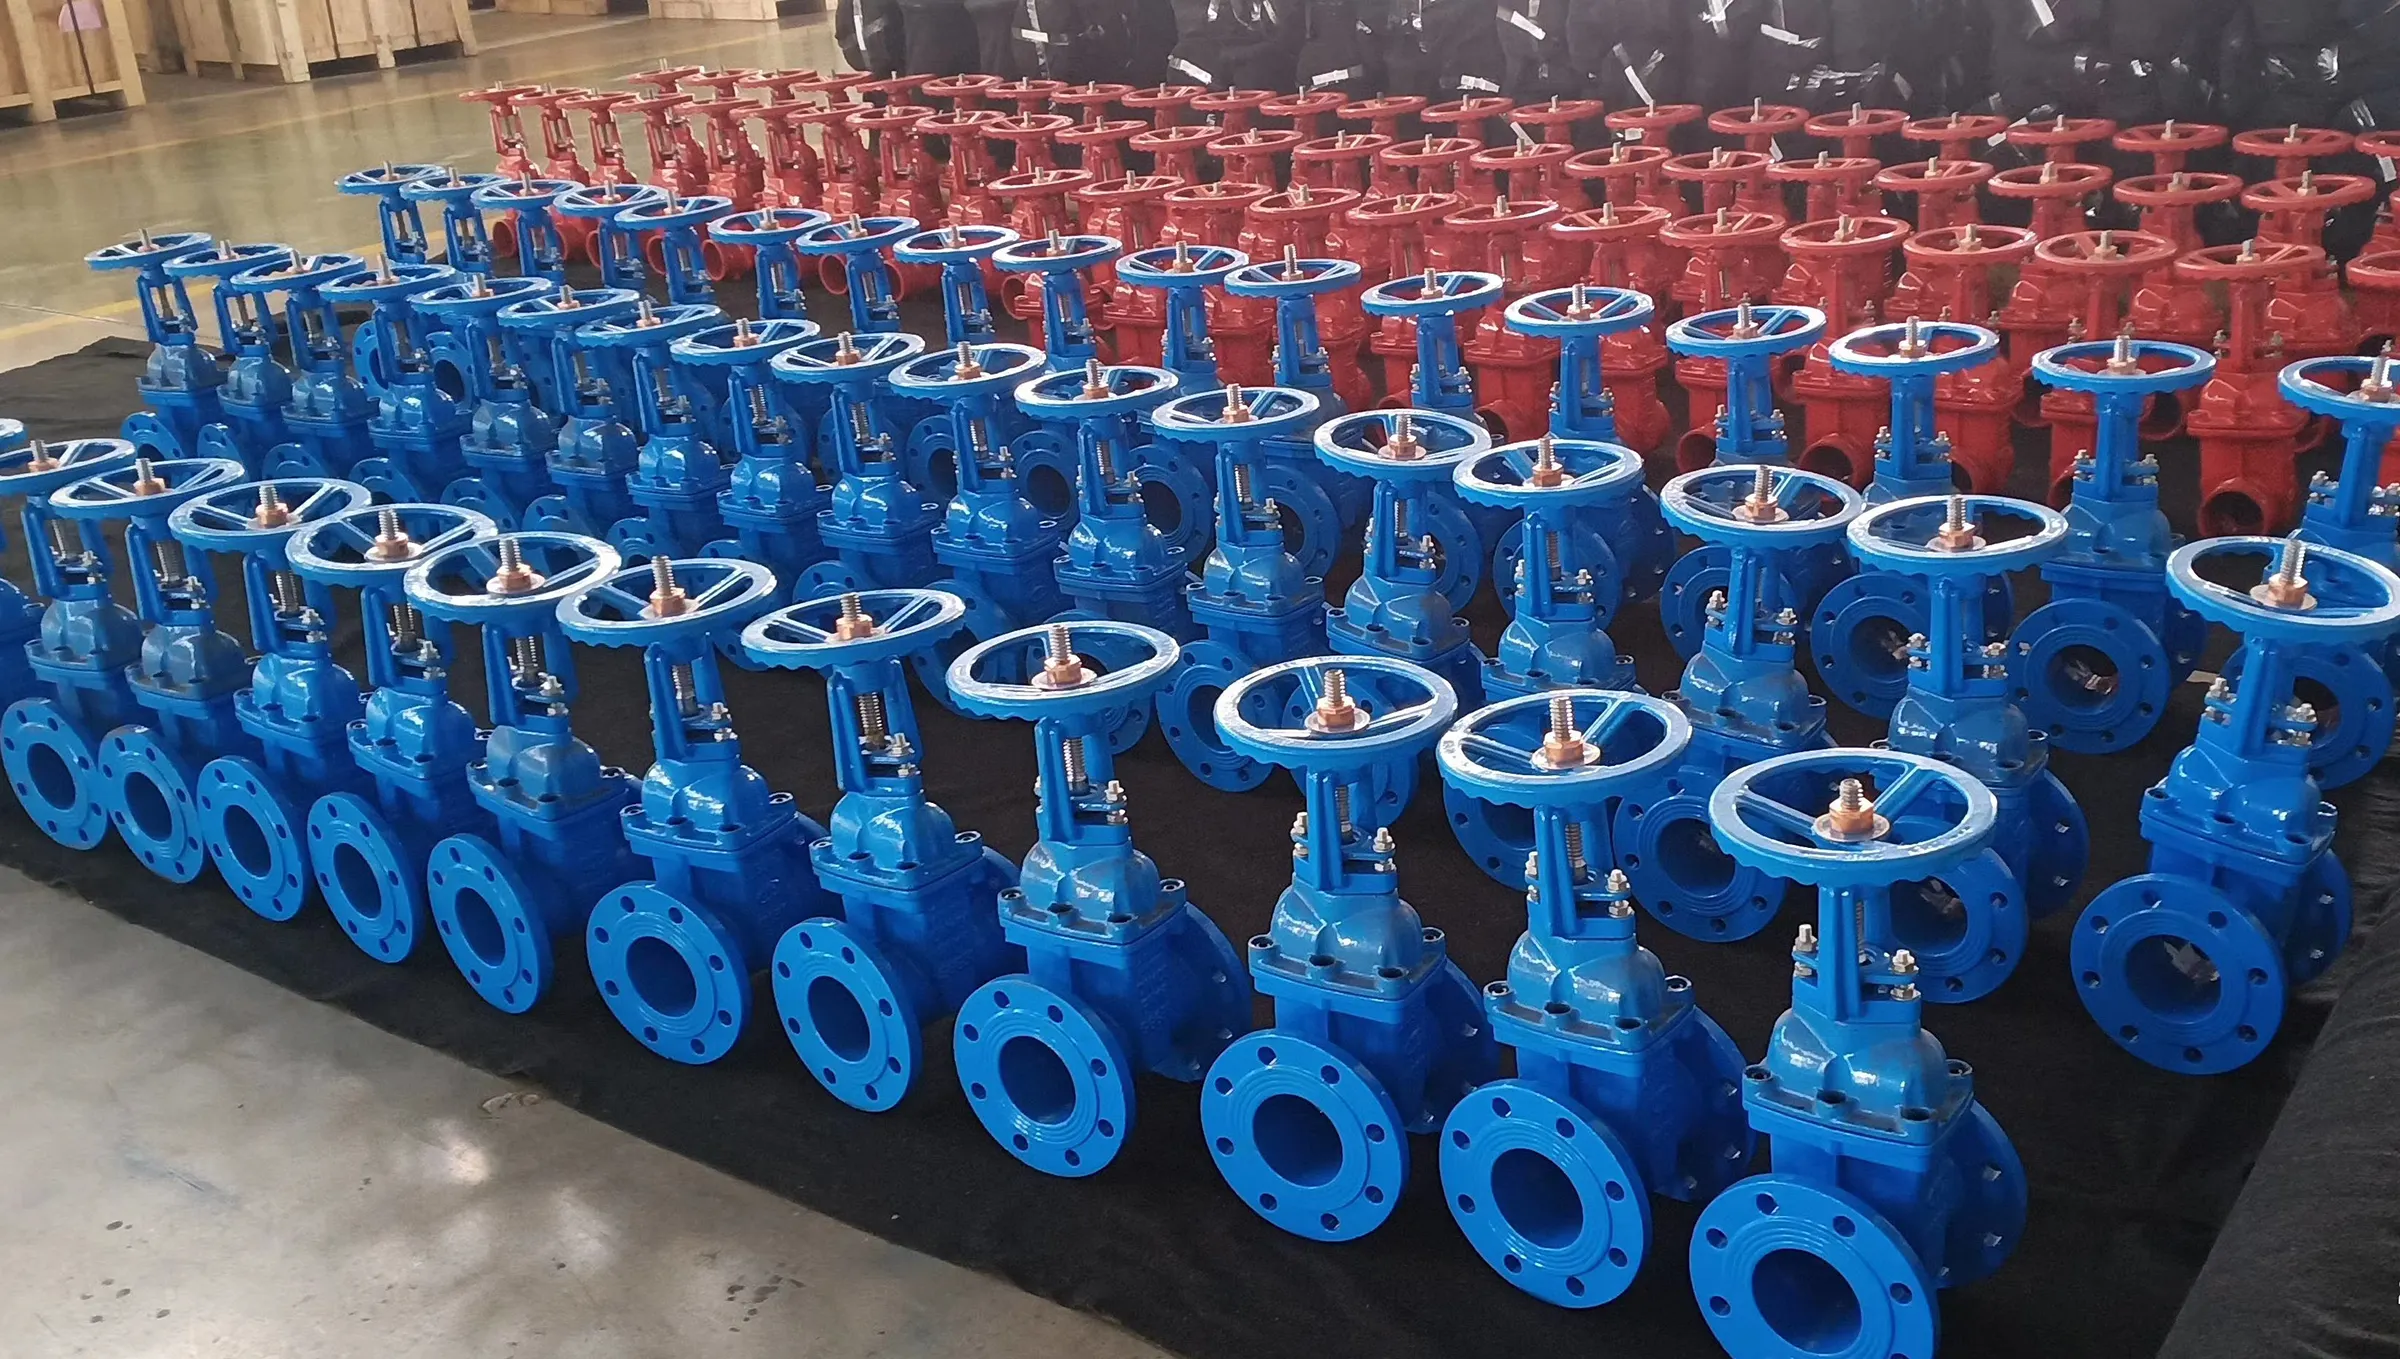 API 6D casting resilient seated 36 Soft seal 300mm water type sluice gate Valve with prices cad drawings